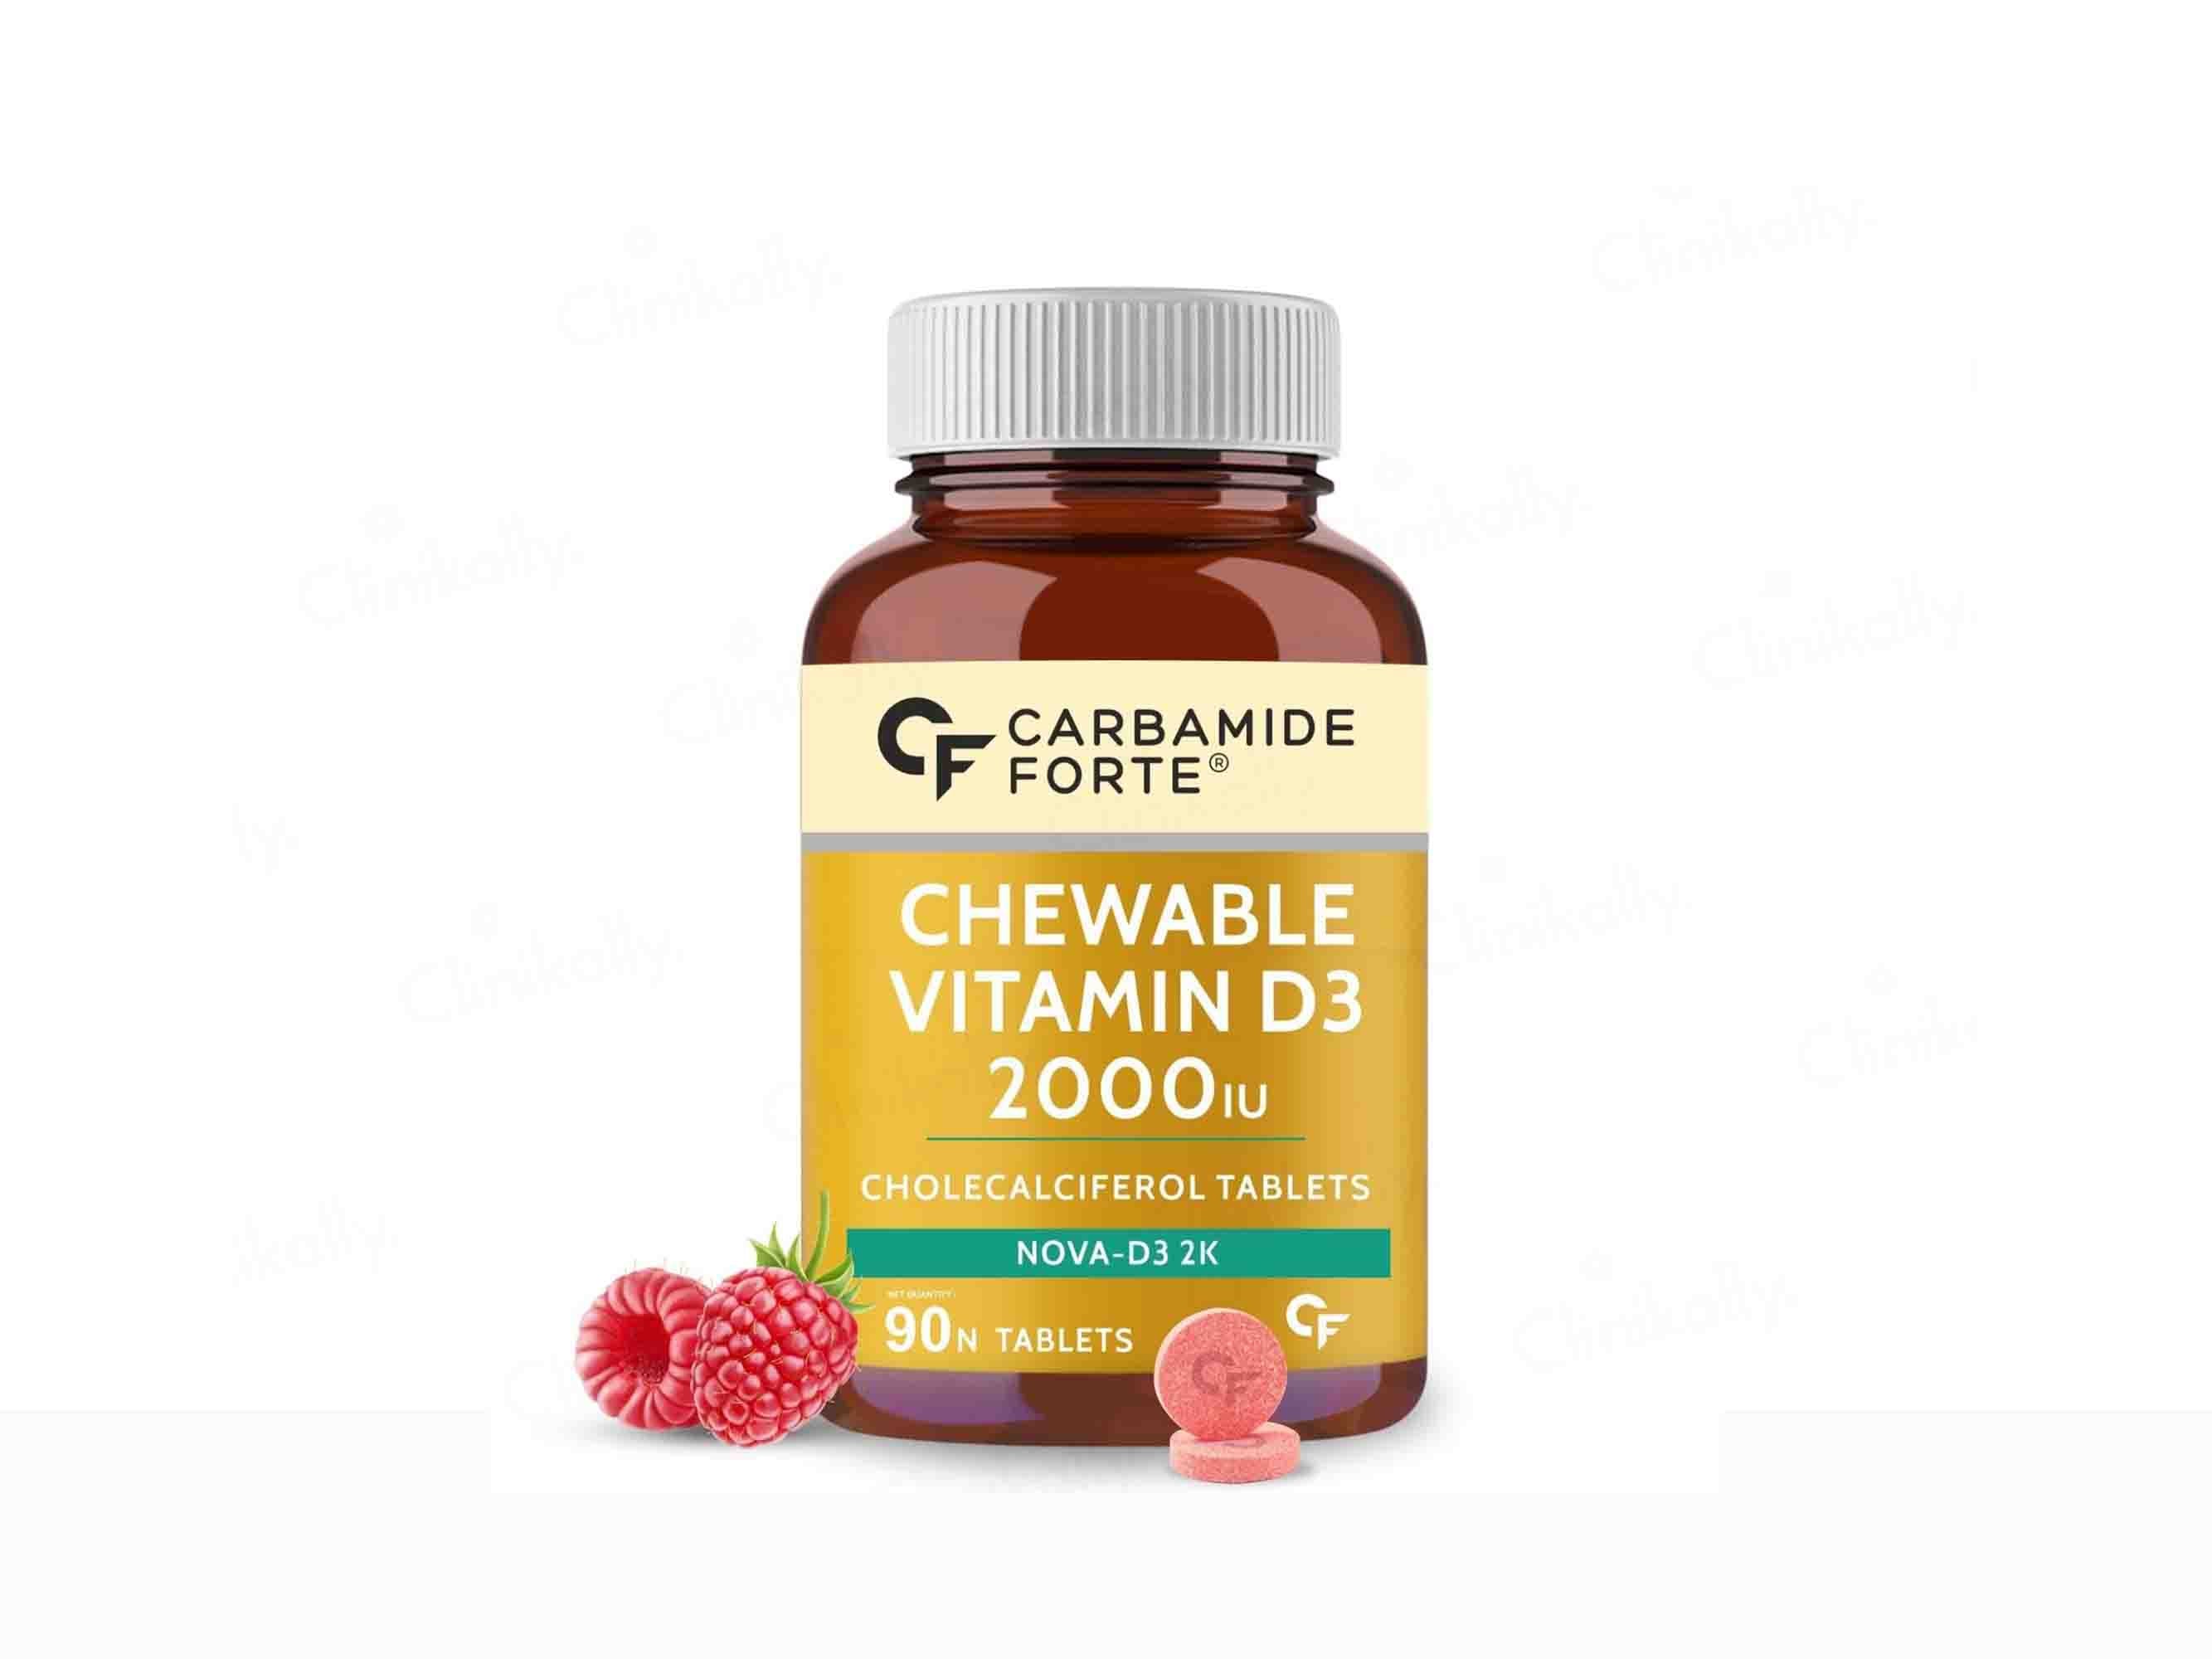 Carbamide Forte Chewable Vitamin D3 2000 IU Tablet